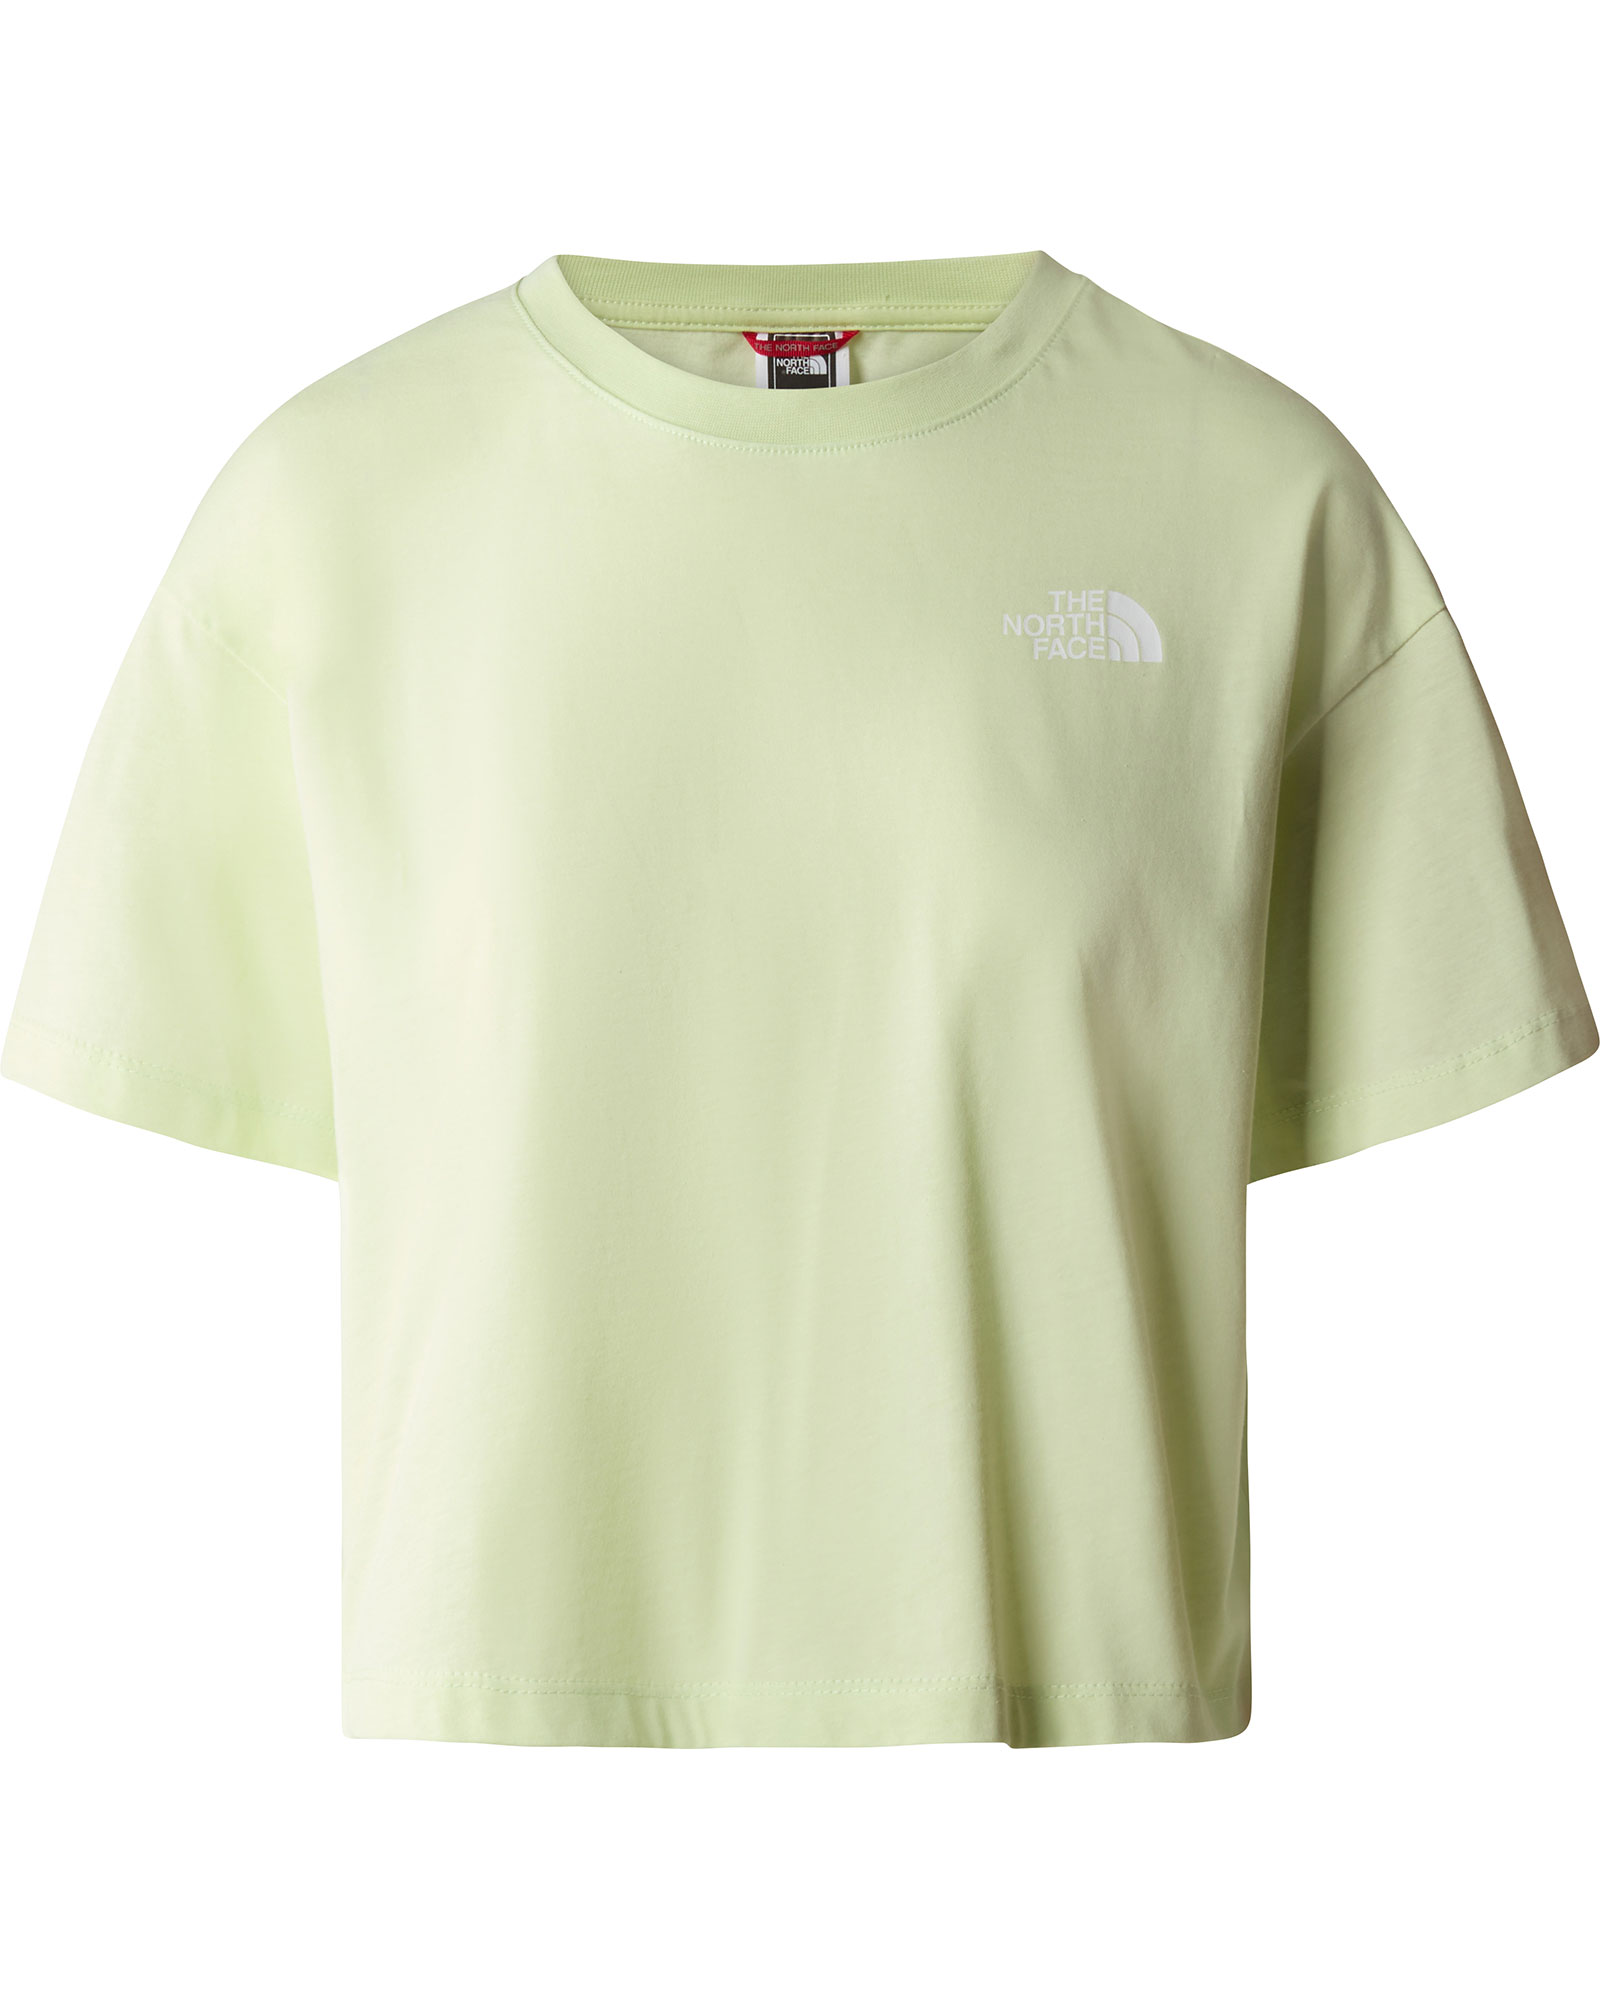 The North Face Cropped Simple Dome Women’s T Shirt - Lime Cream S